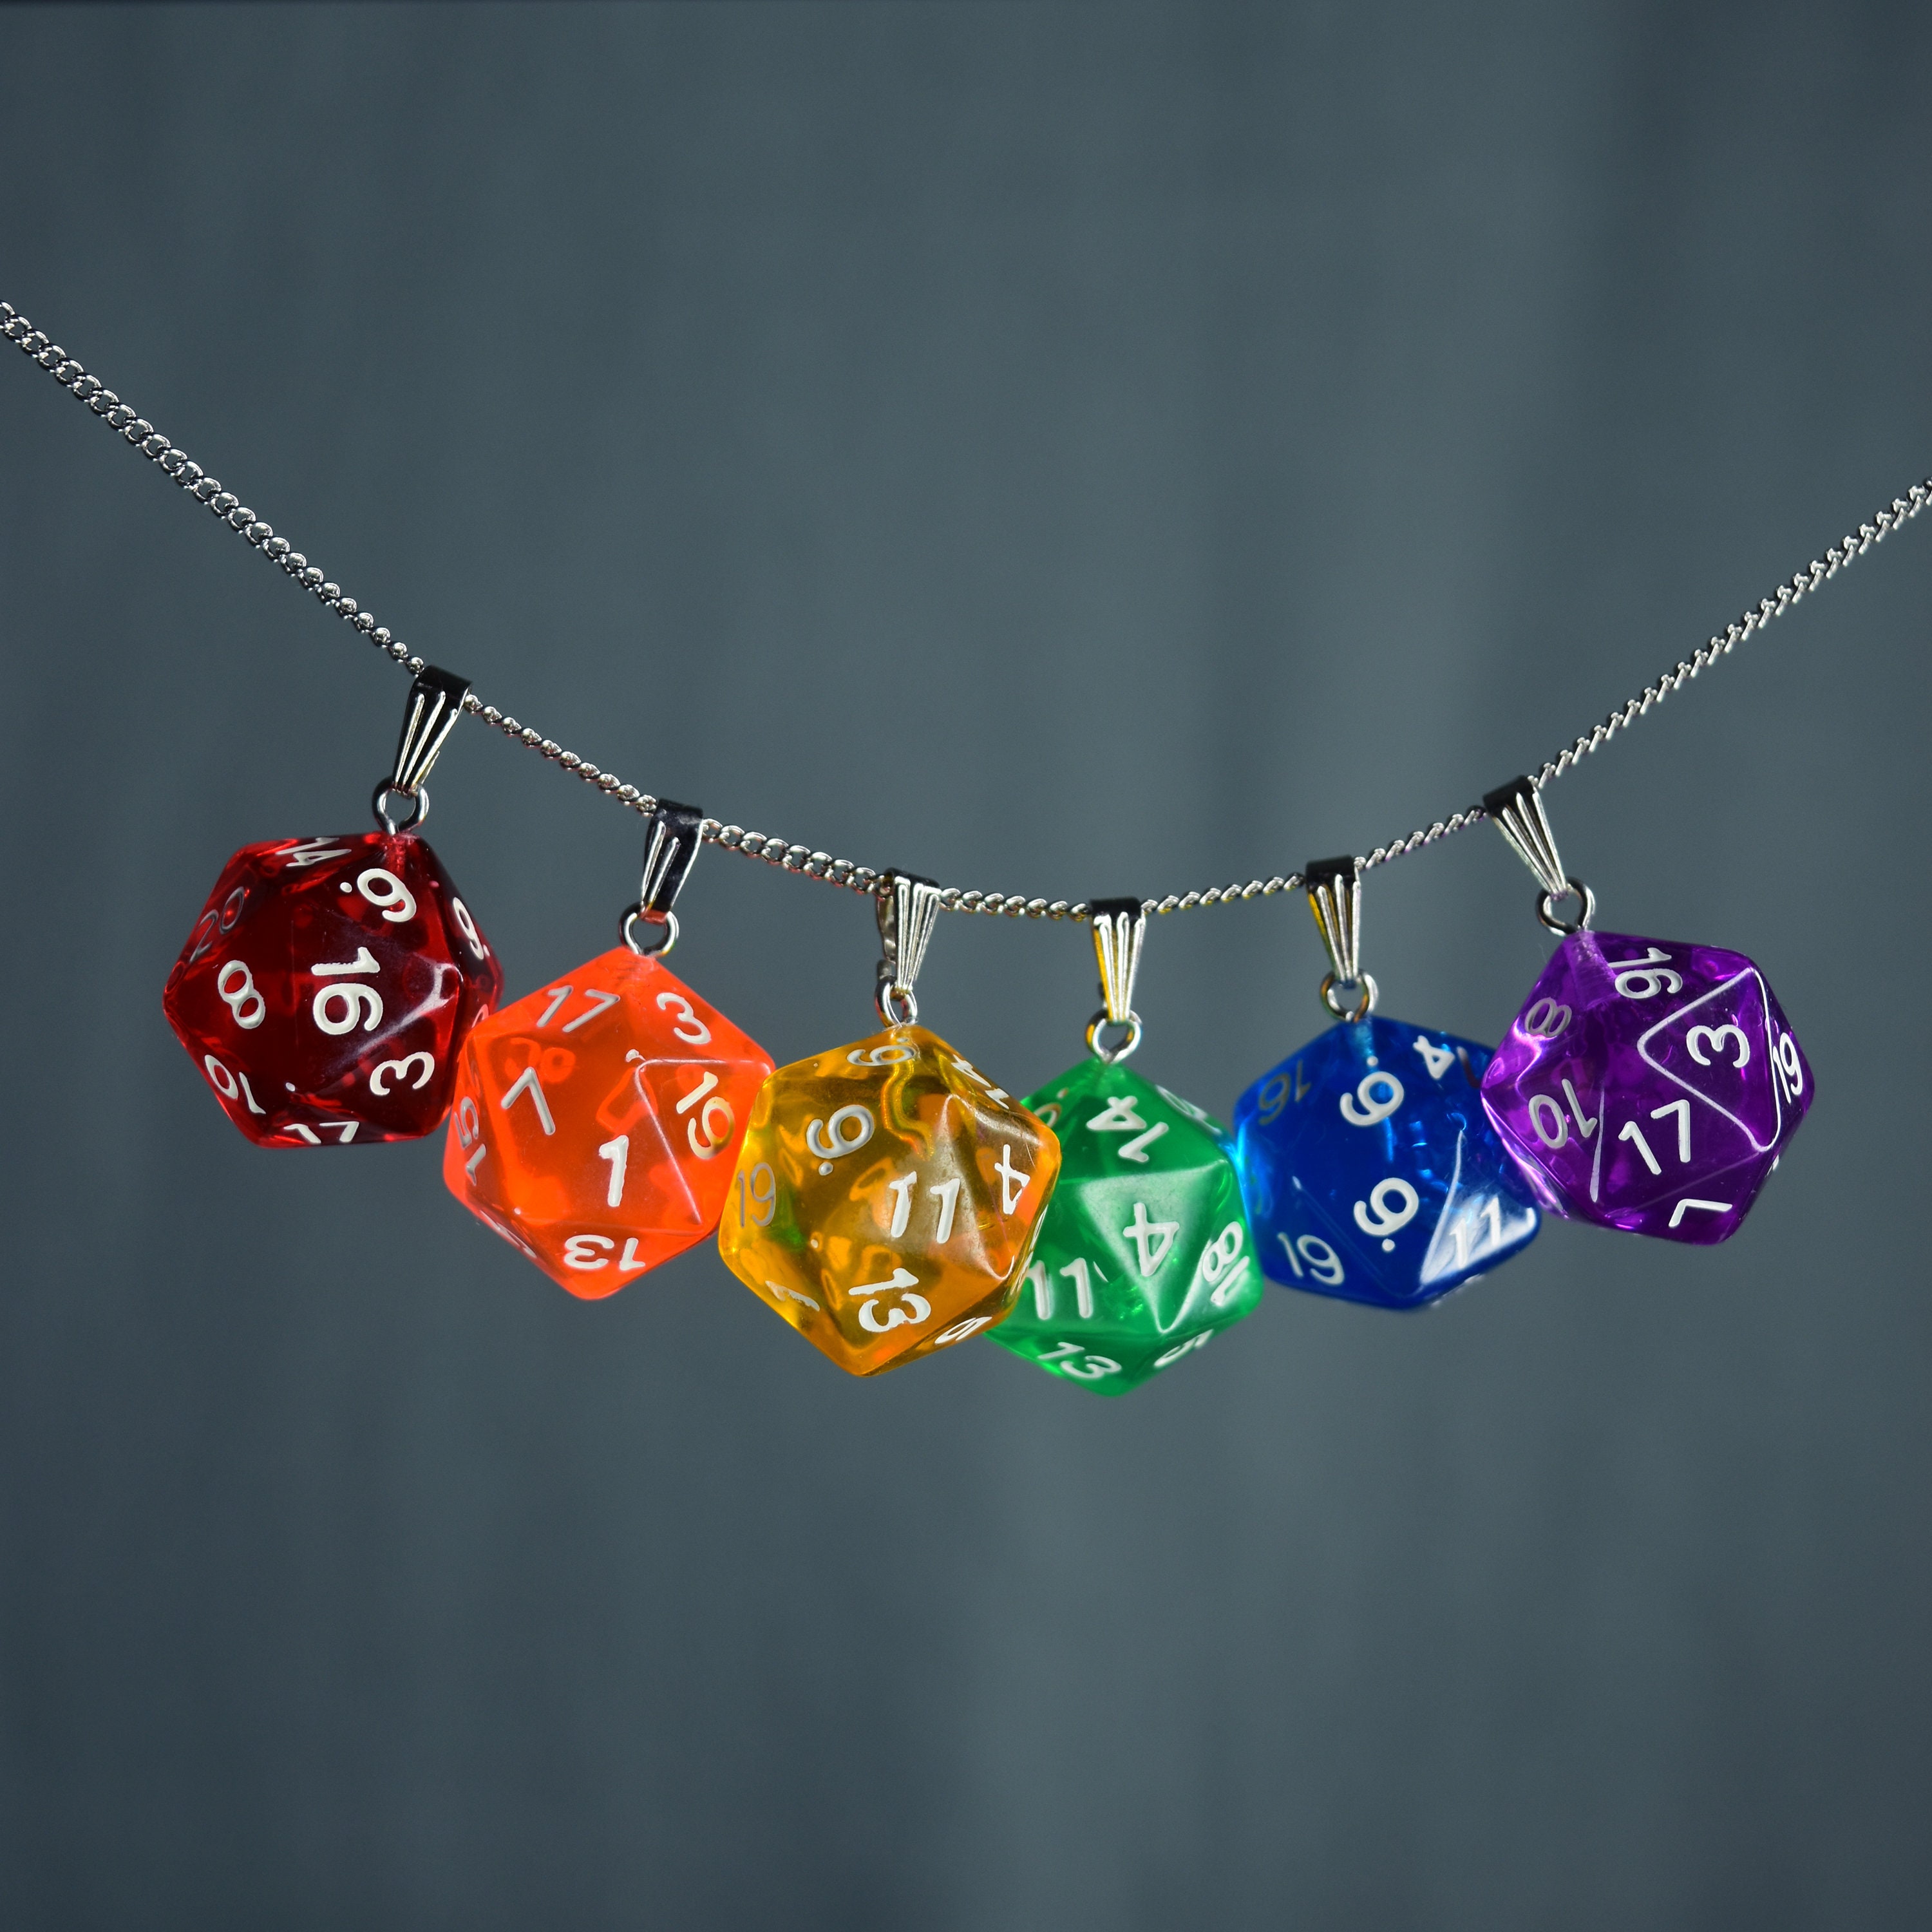 Removable D20 Dice Cage Necklace with Vegan Leather